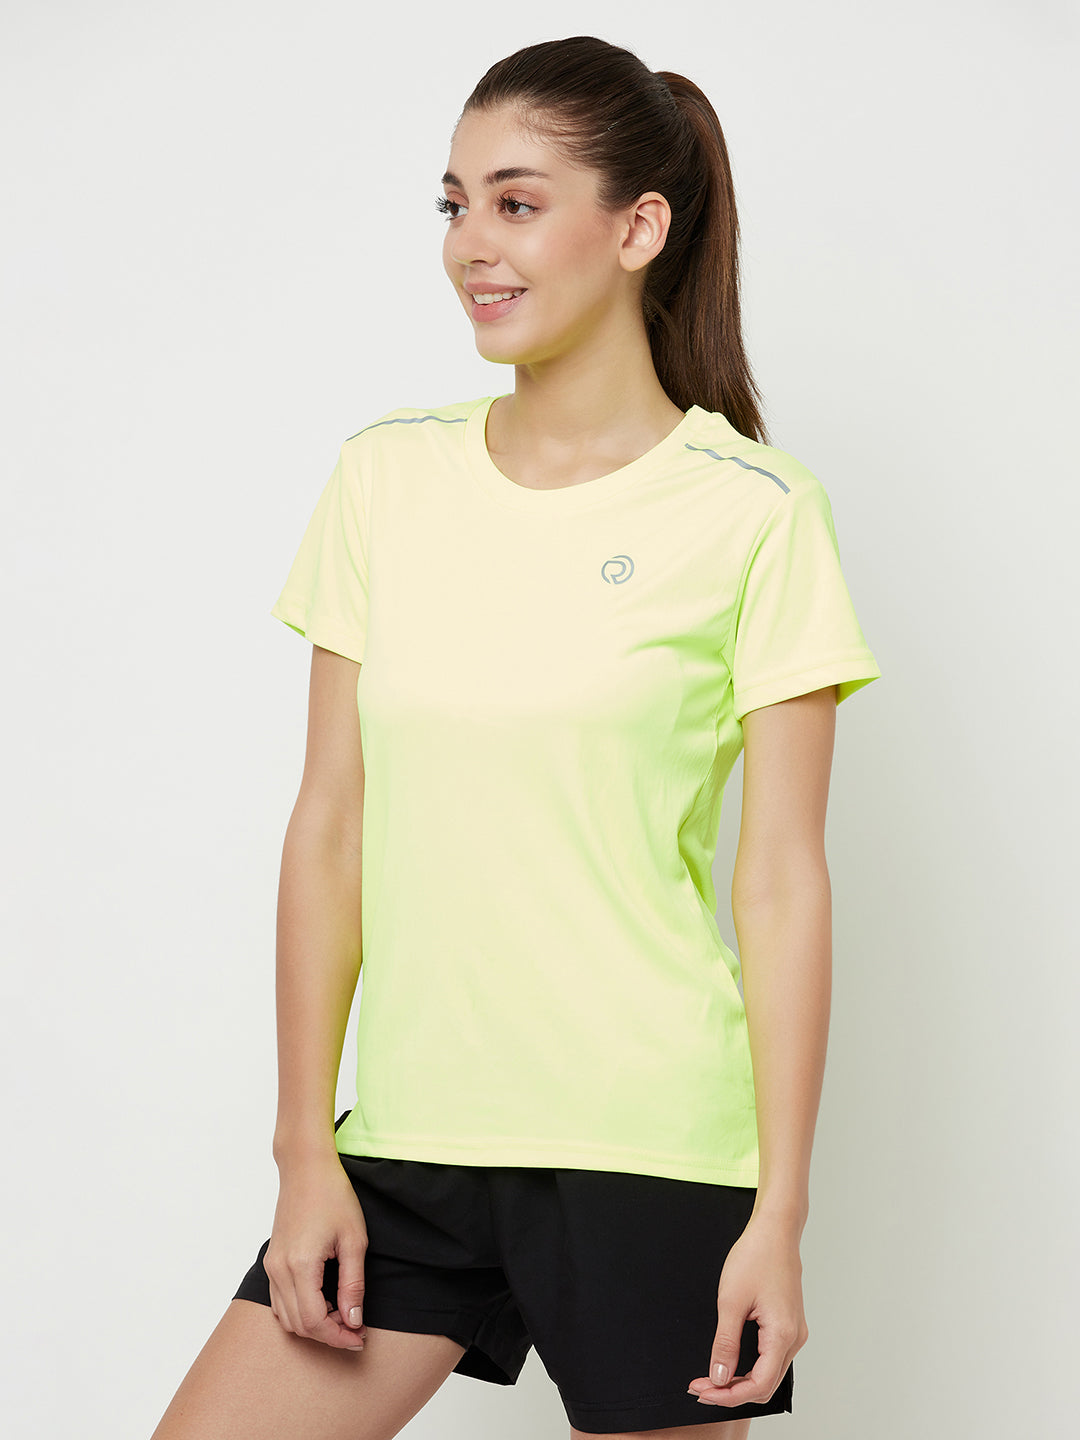 Performance Sports T-shirt - Pack of 2 Black & Neon yellow